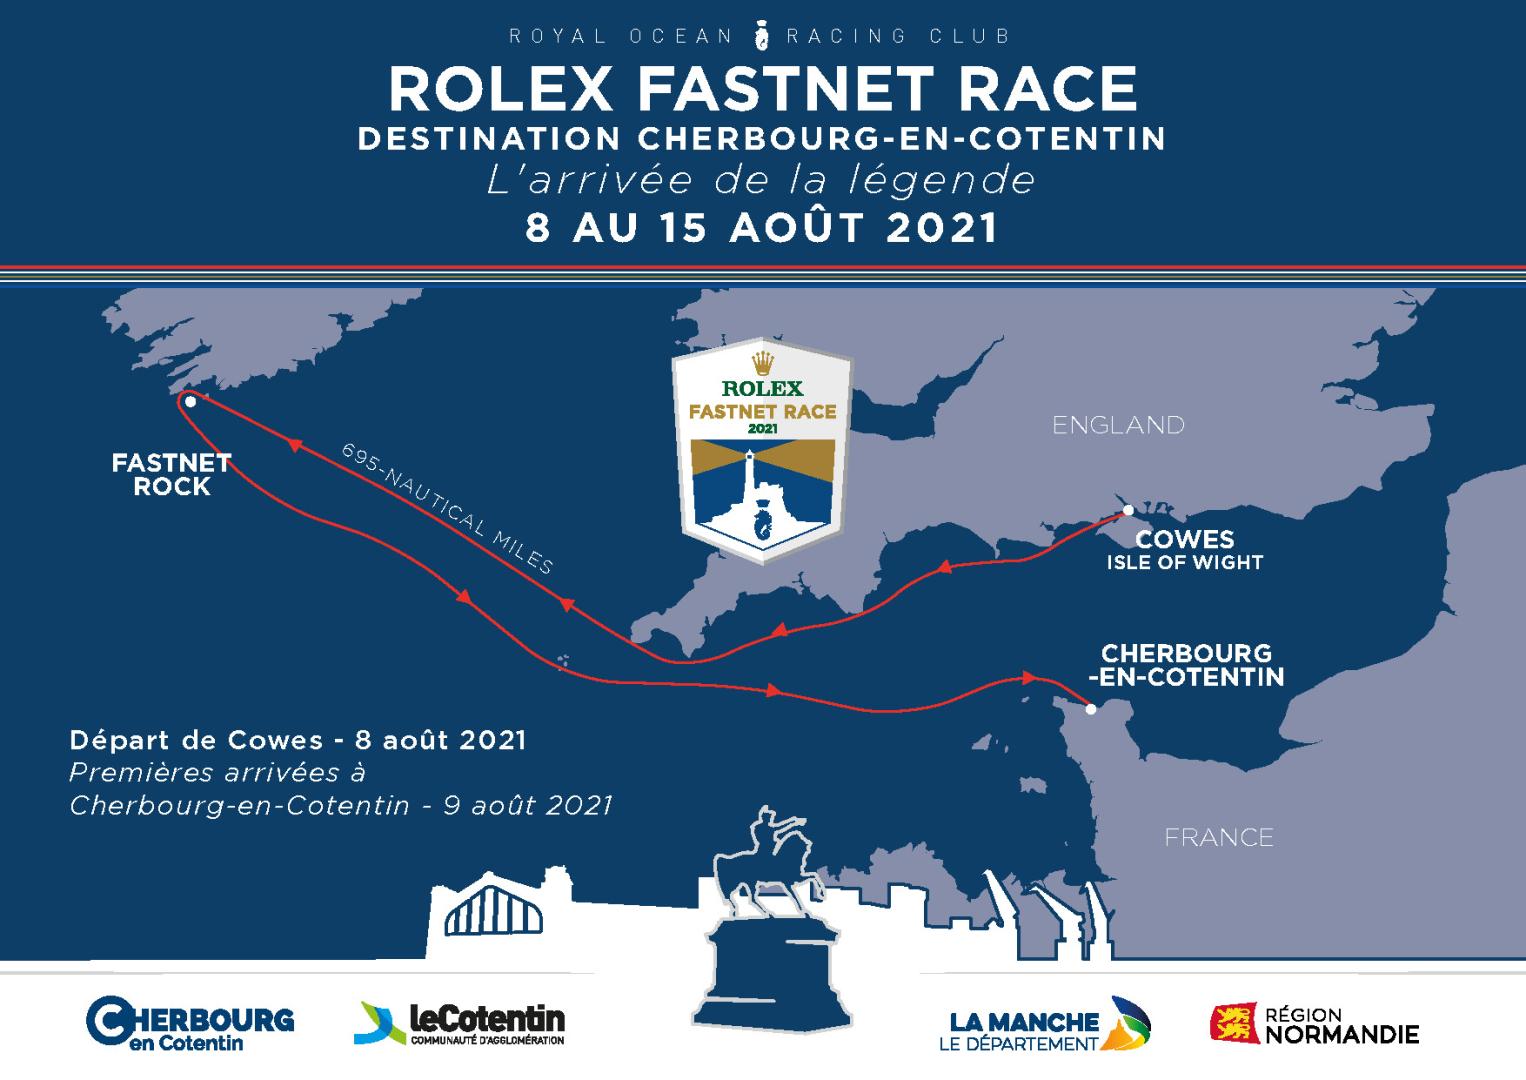 Rolex Fastnet Race entry numbers smash all records